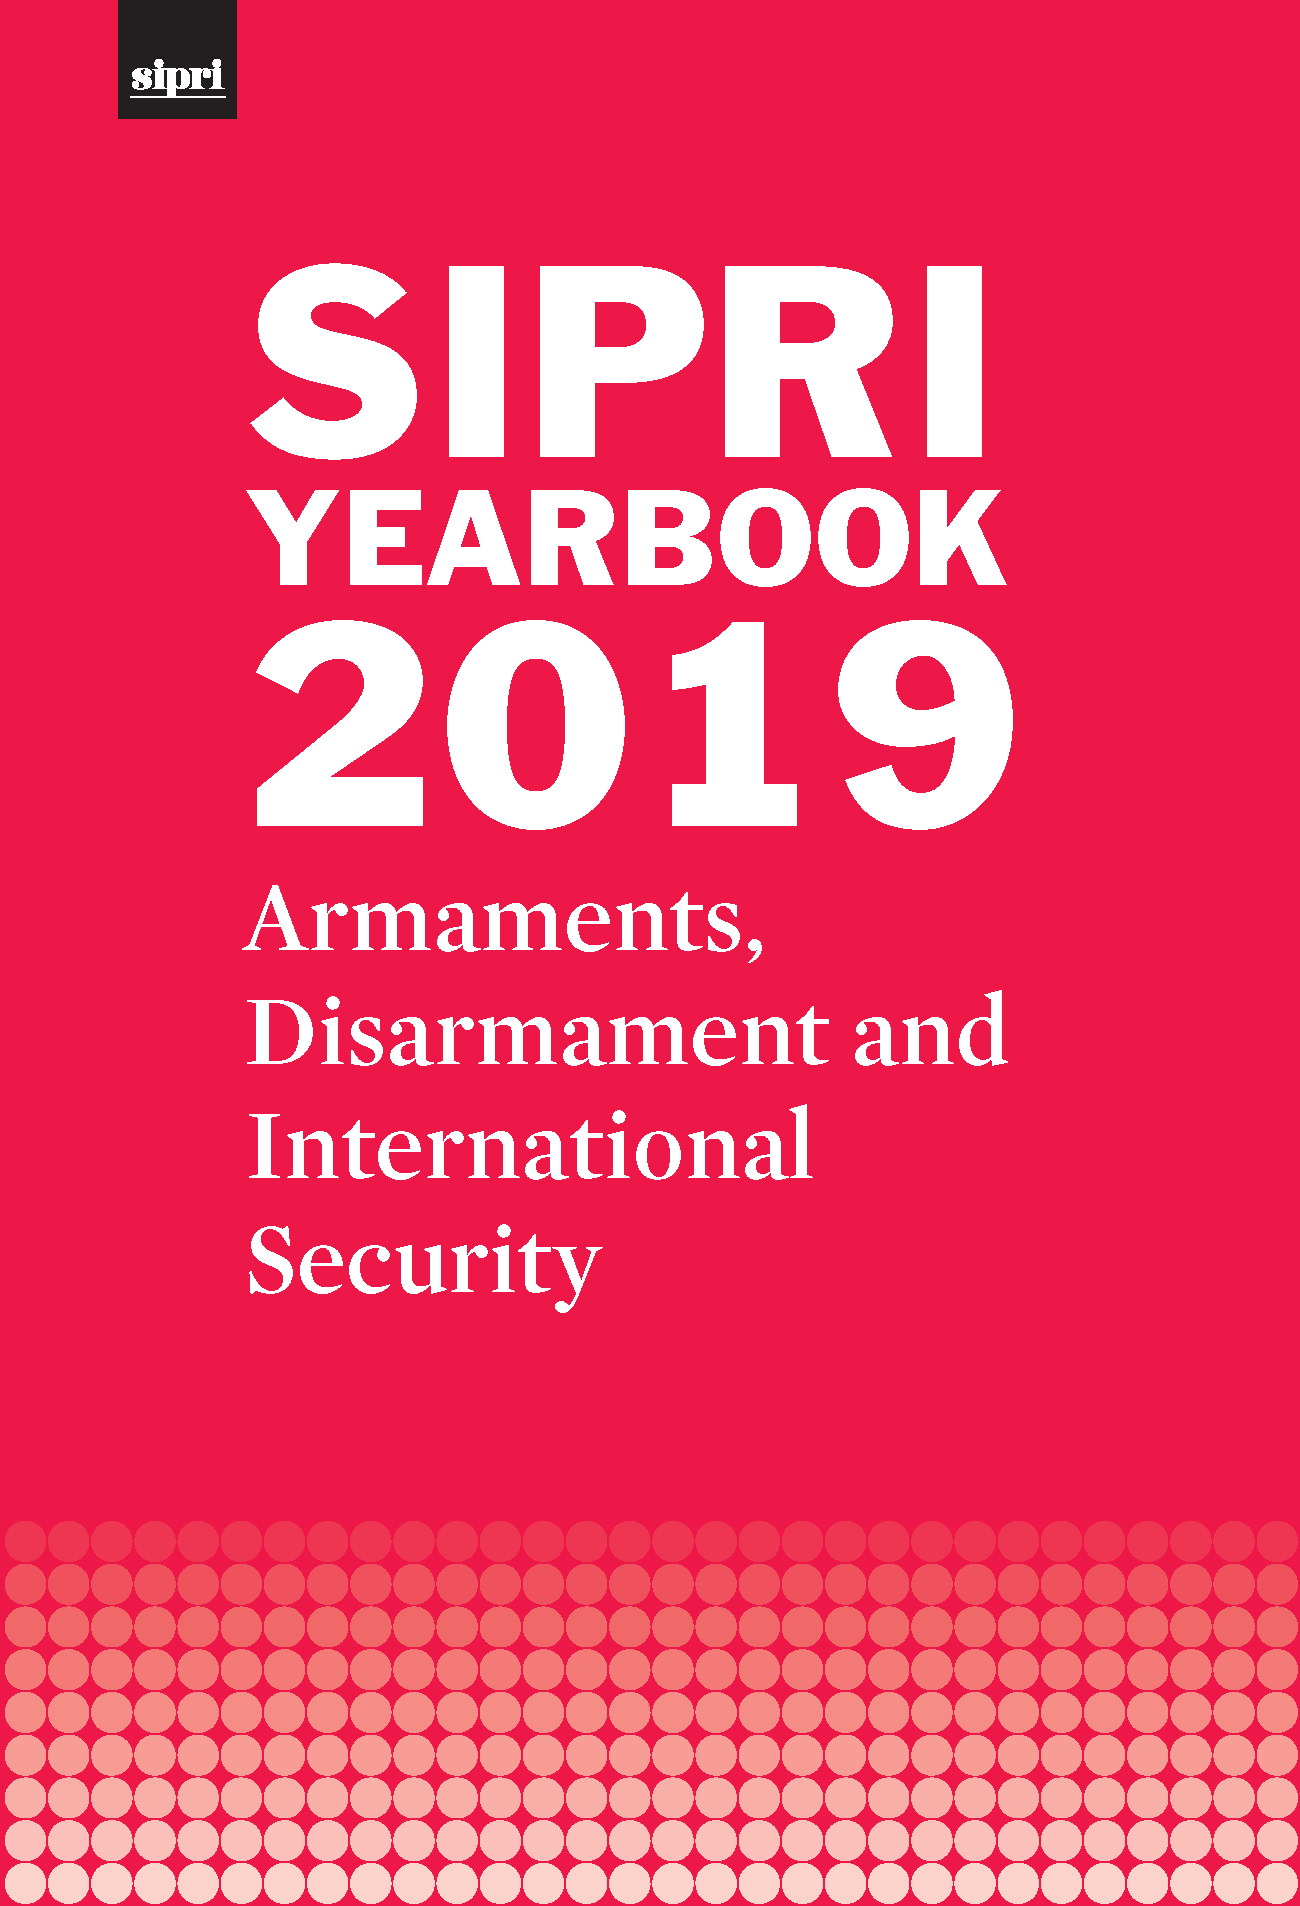 SIPRI Yearbook 2019